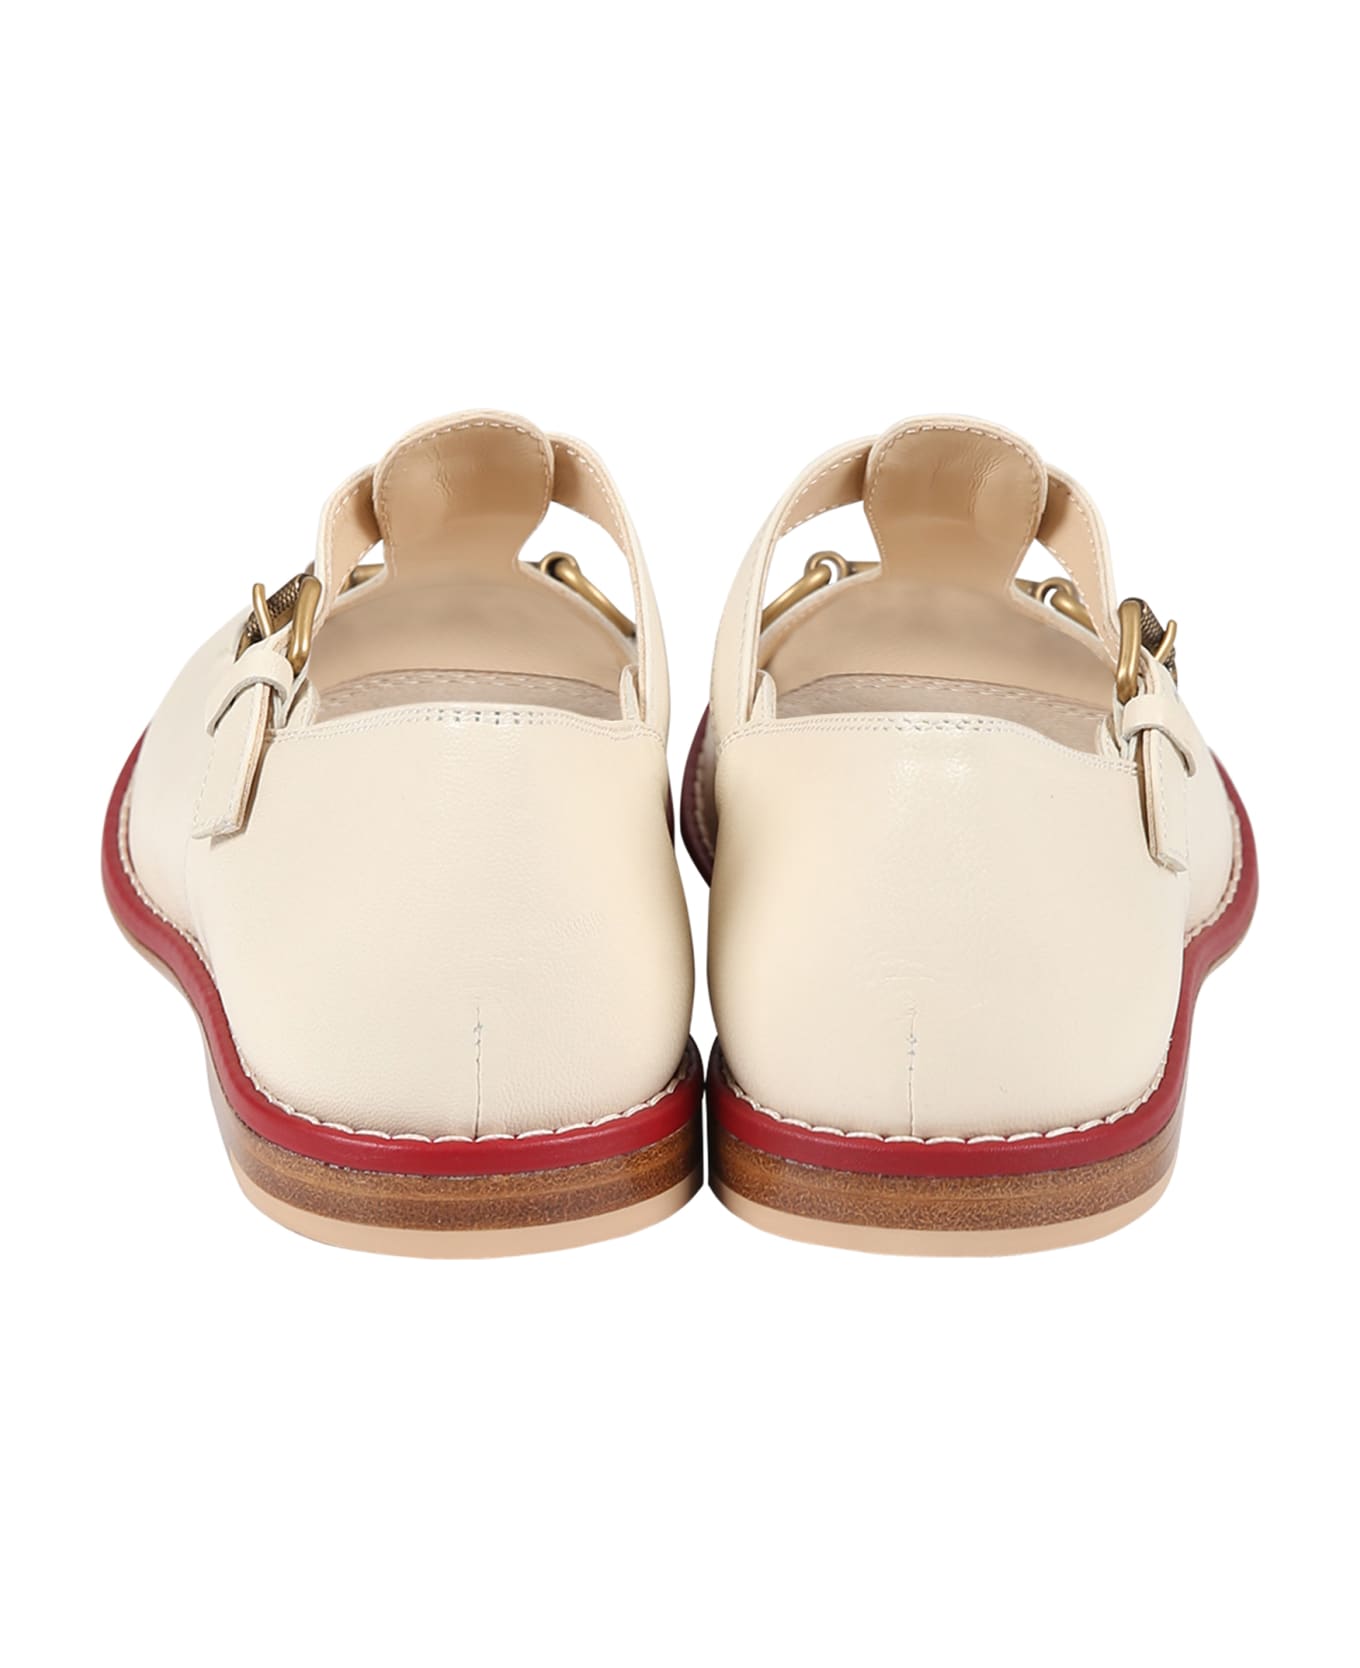 Gucci Ivory Ballet Flats For Girl With Iconic Horsebit - White シューズ